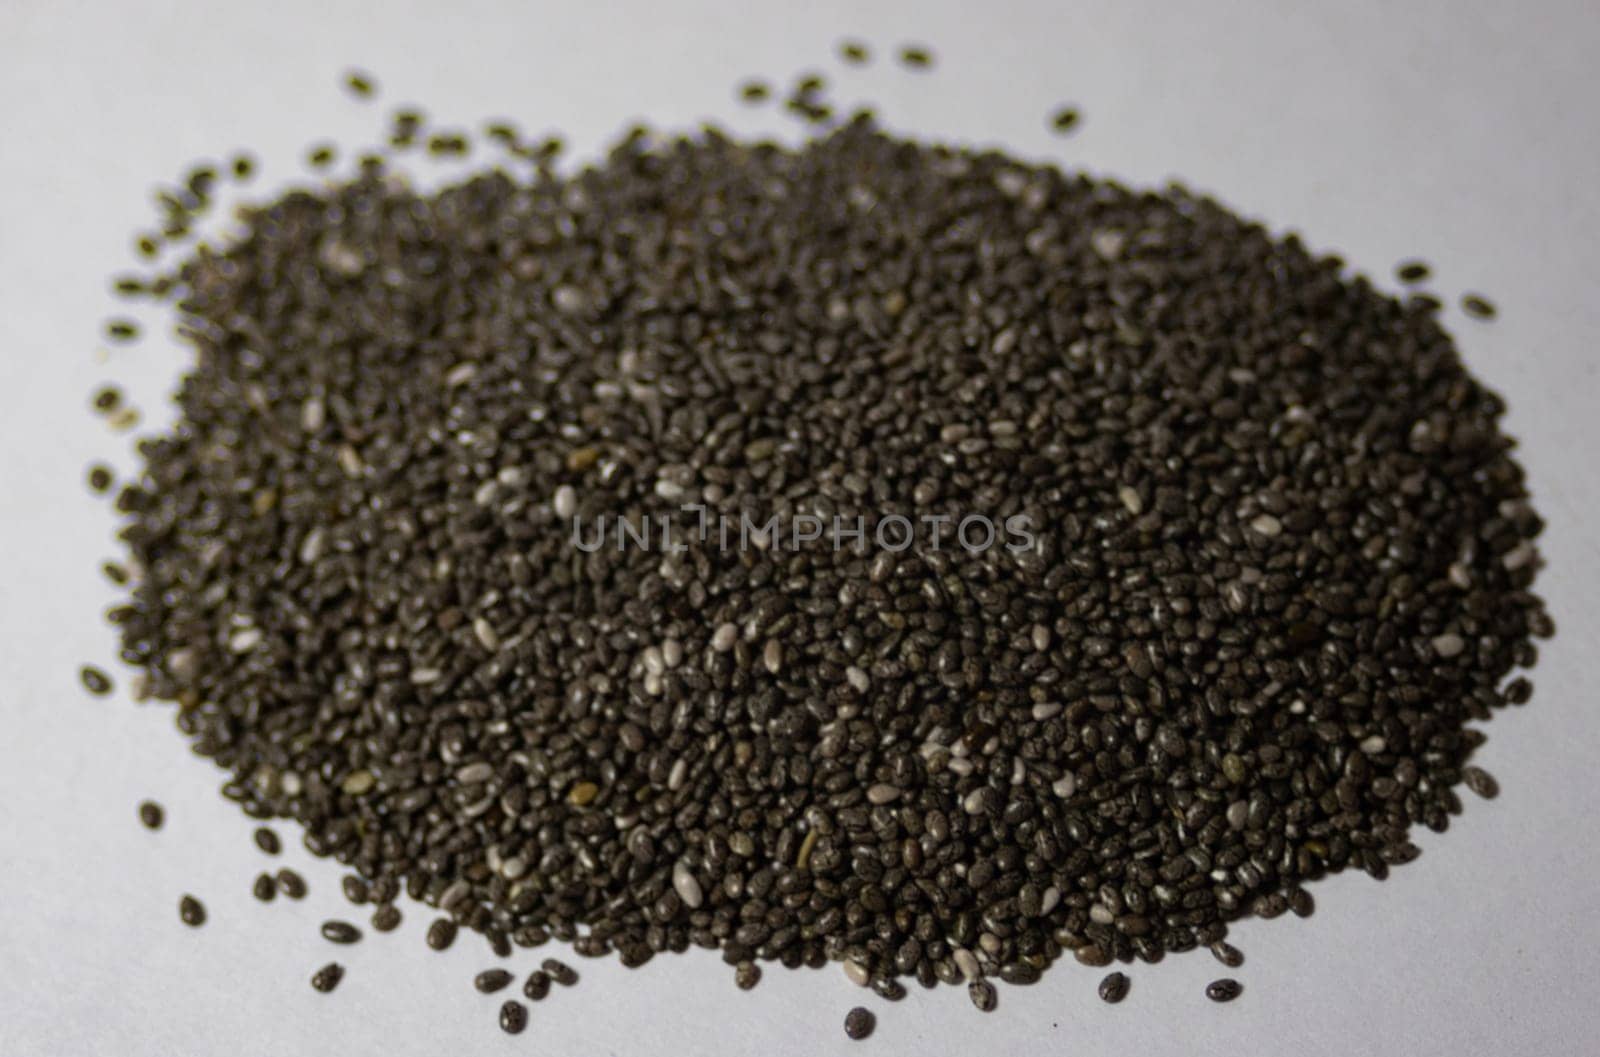 Close-up horiuzontal photo of chia seeds. Source of protins for vegetarian diets. Ideal for vegans